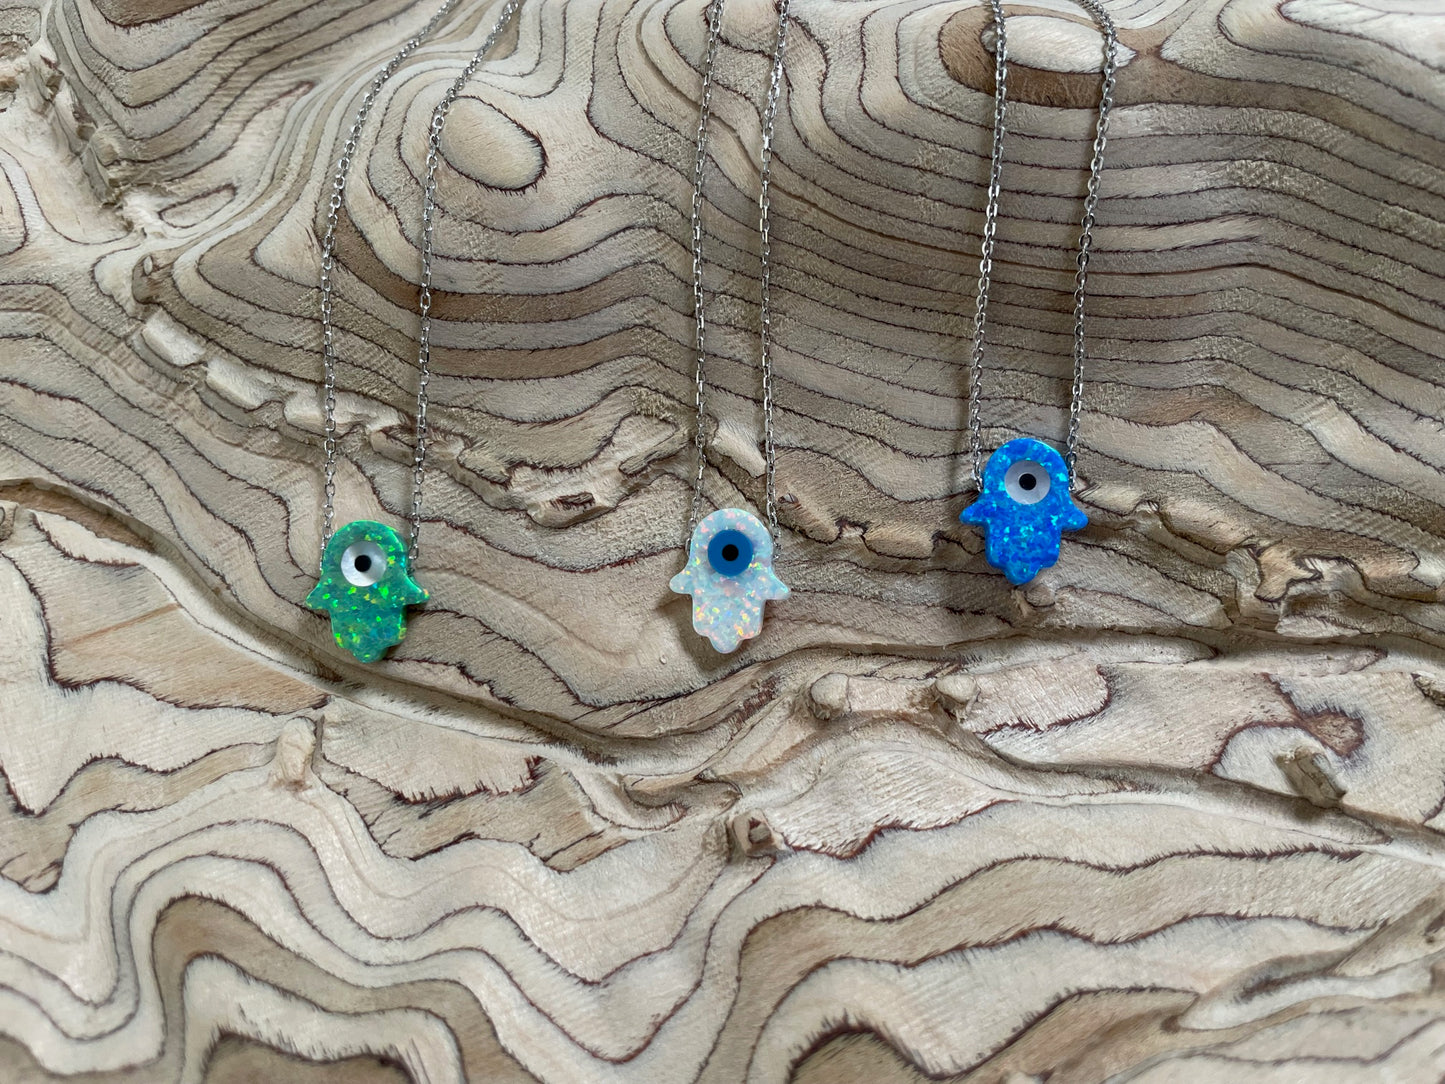 Hand+Eye Necklace